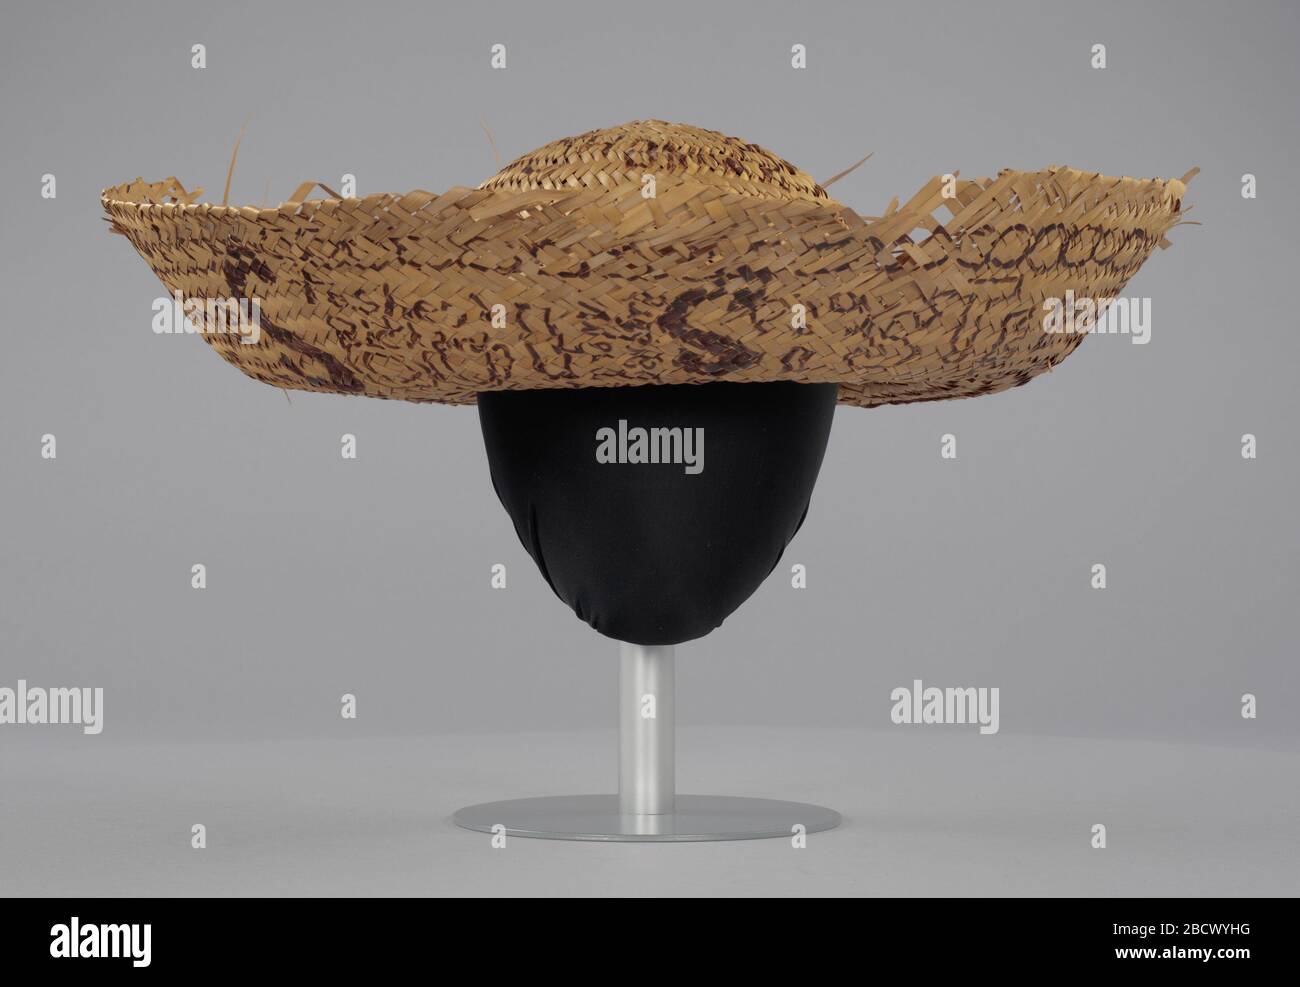 Straw sombrero hat associated with Civil Rights campaign Camden Alabama. A woven straw sombrero hat with a rounded crown and wide brim with rolled edges. The ends of some straw pieces are loose on the brim. The hat has writing in brown marker on the crown and underside of the brim. Straw sombrero hat associated with Civil Rights campaign Camden Alabama Stock Photo